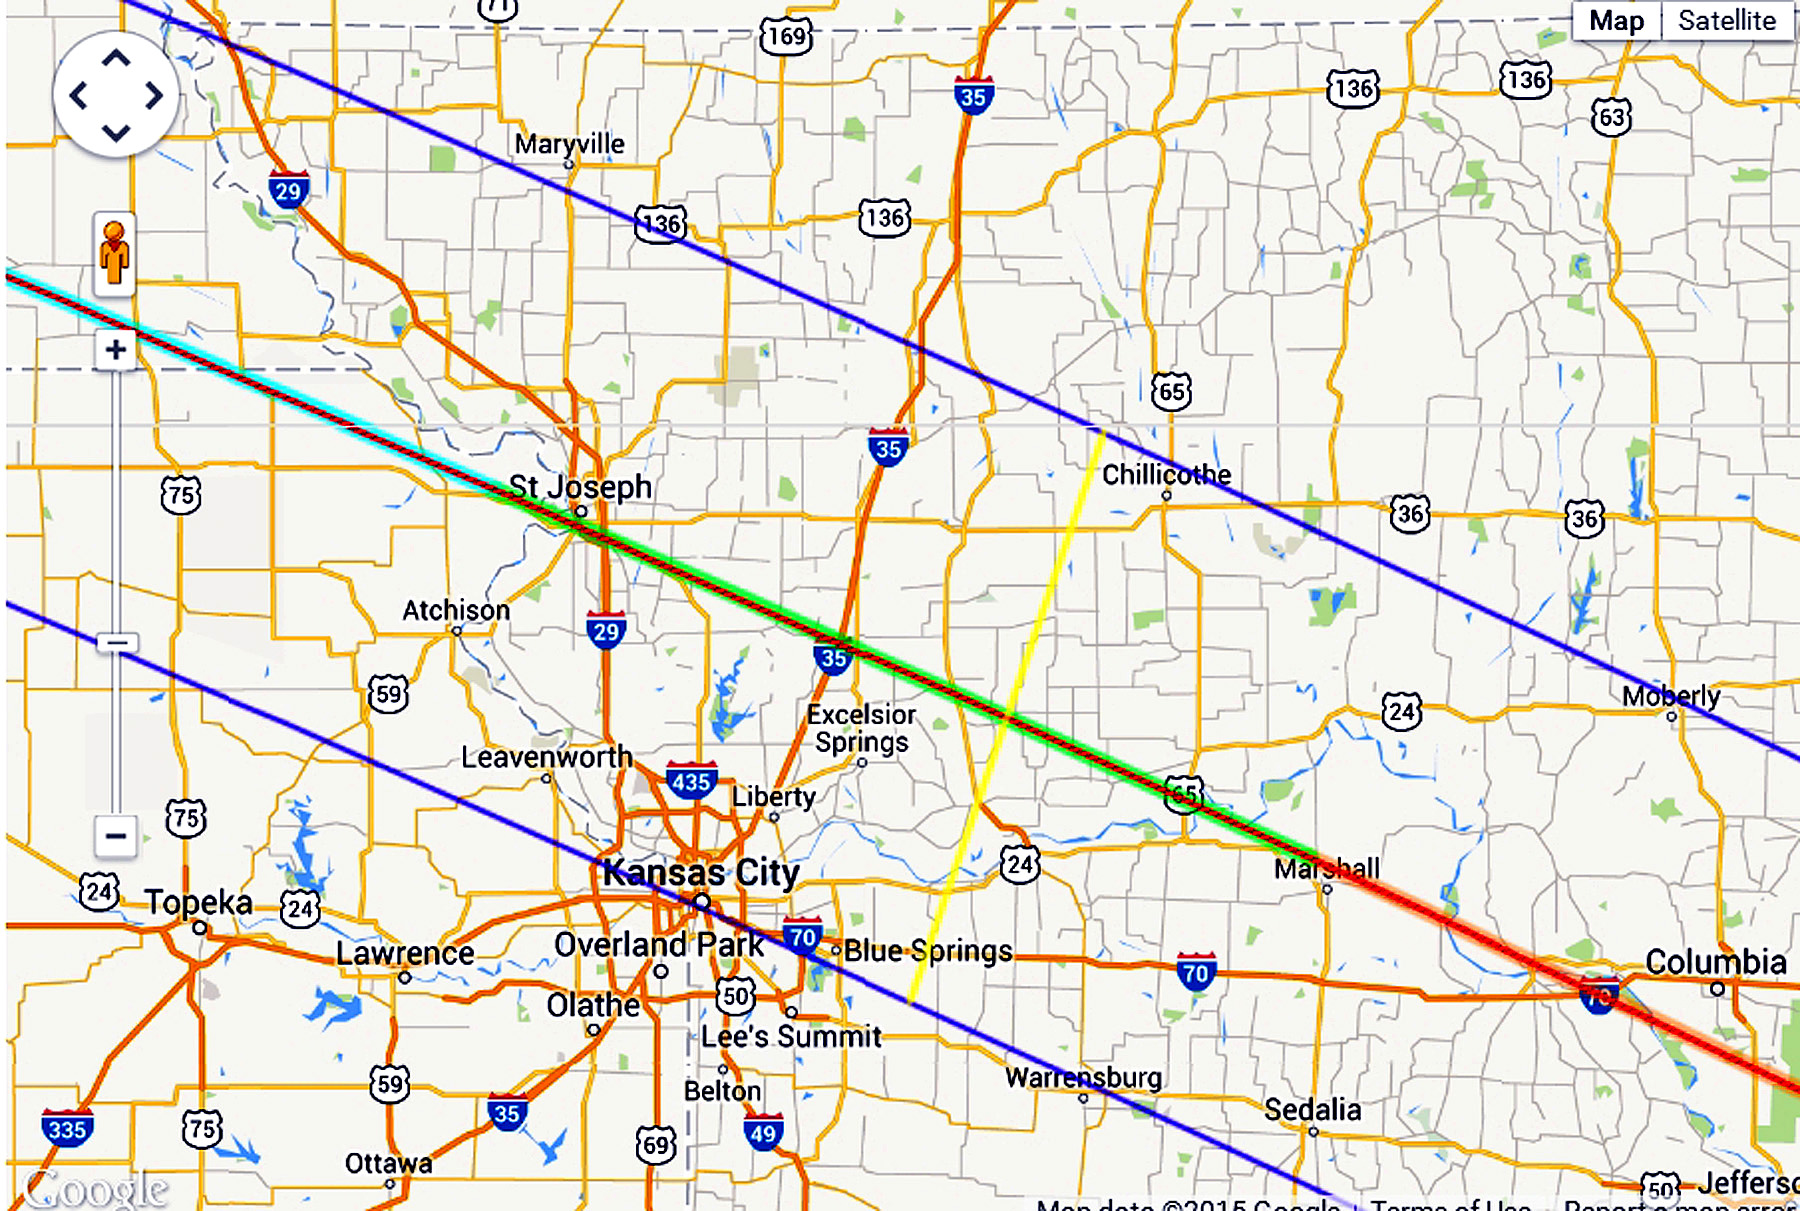 Eclipse 2017 - A44 - Path of Totality over Kansas City